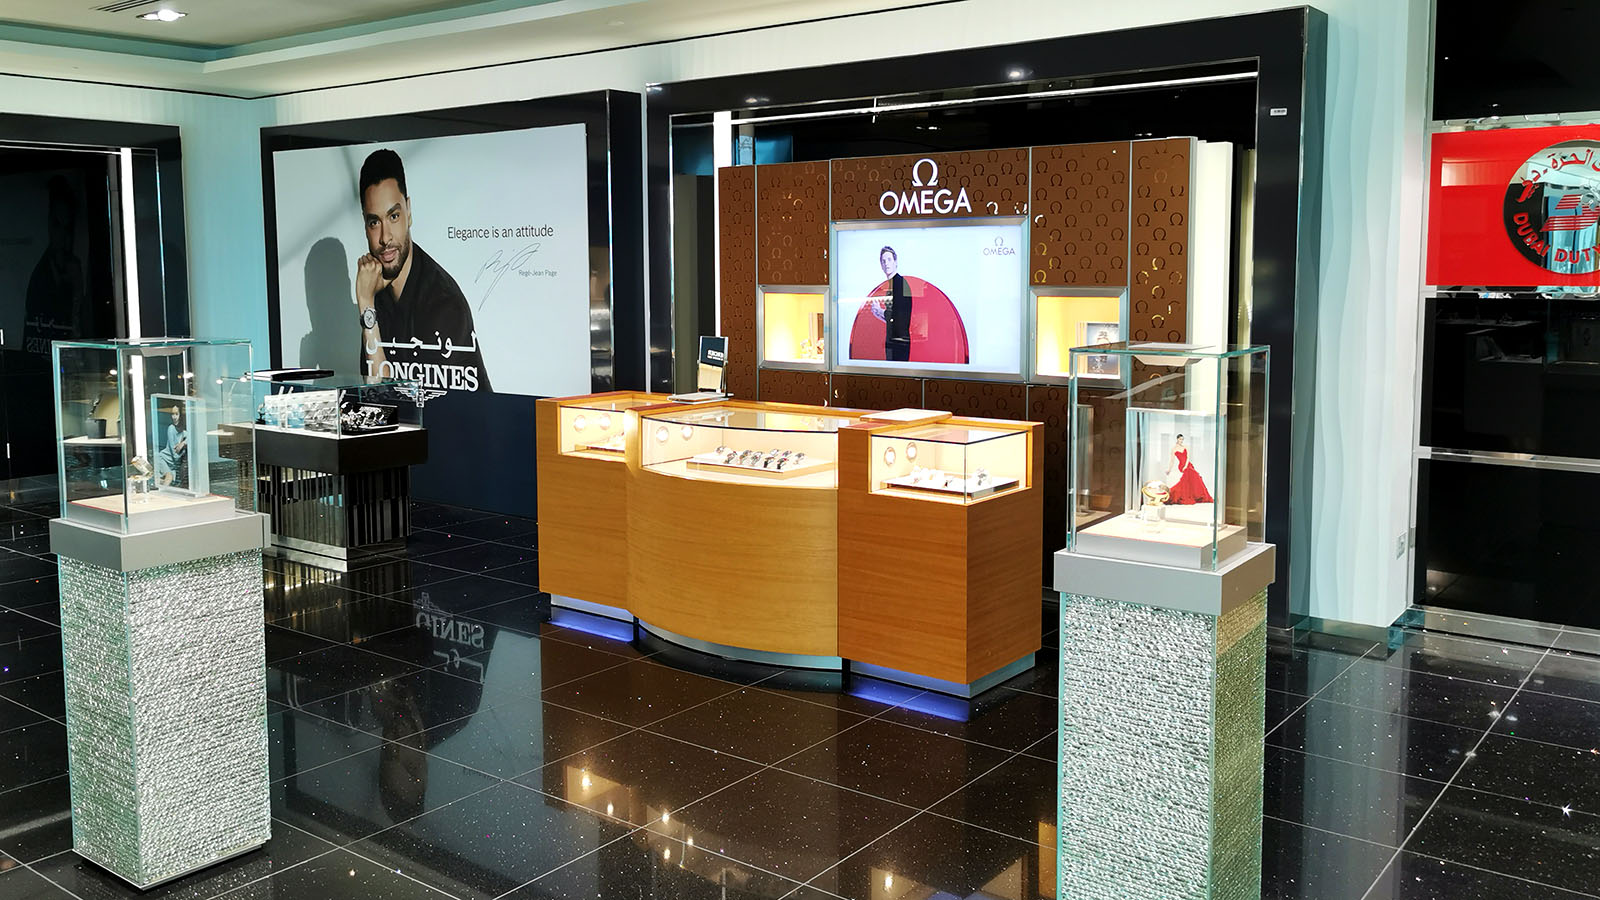 Buy watches in the Emirates First Class Lounge in Dubai Concourse A